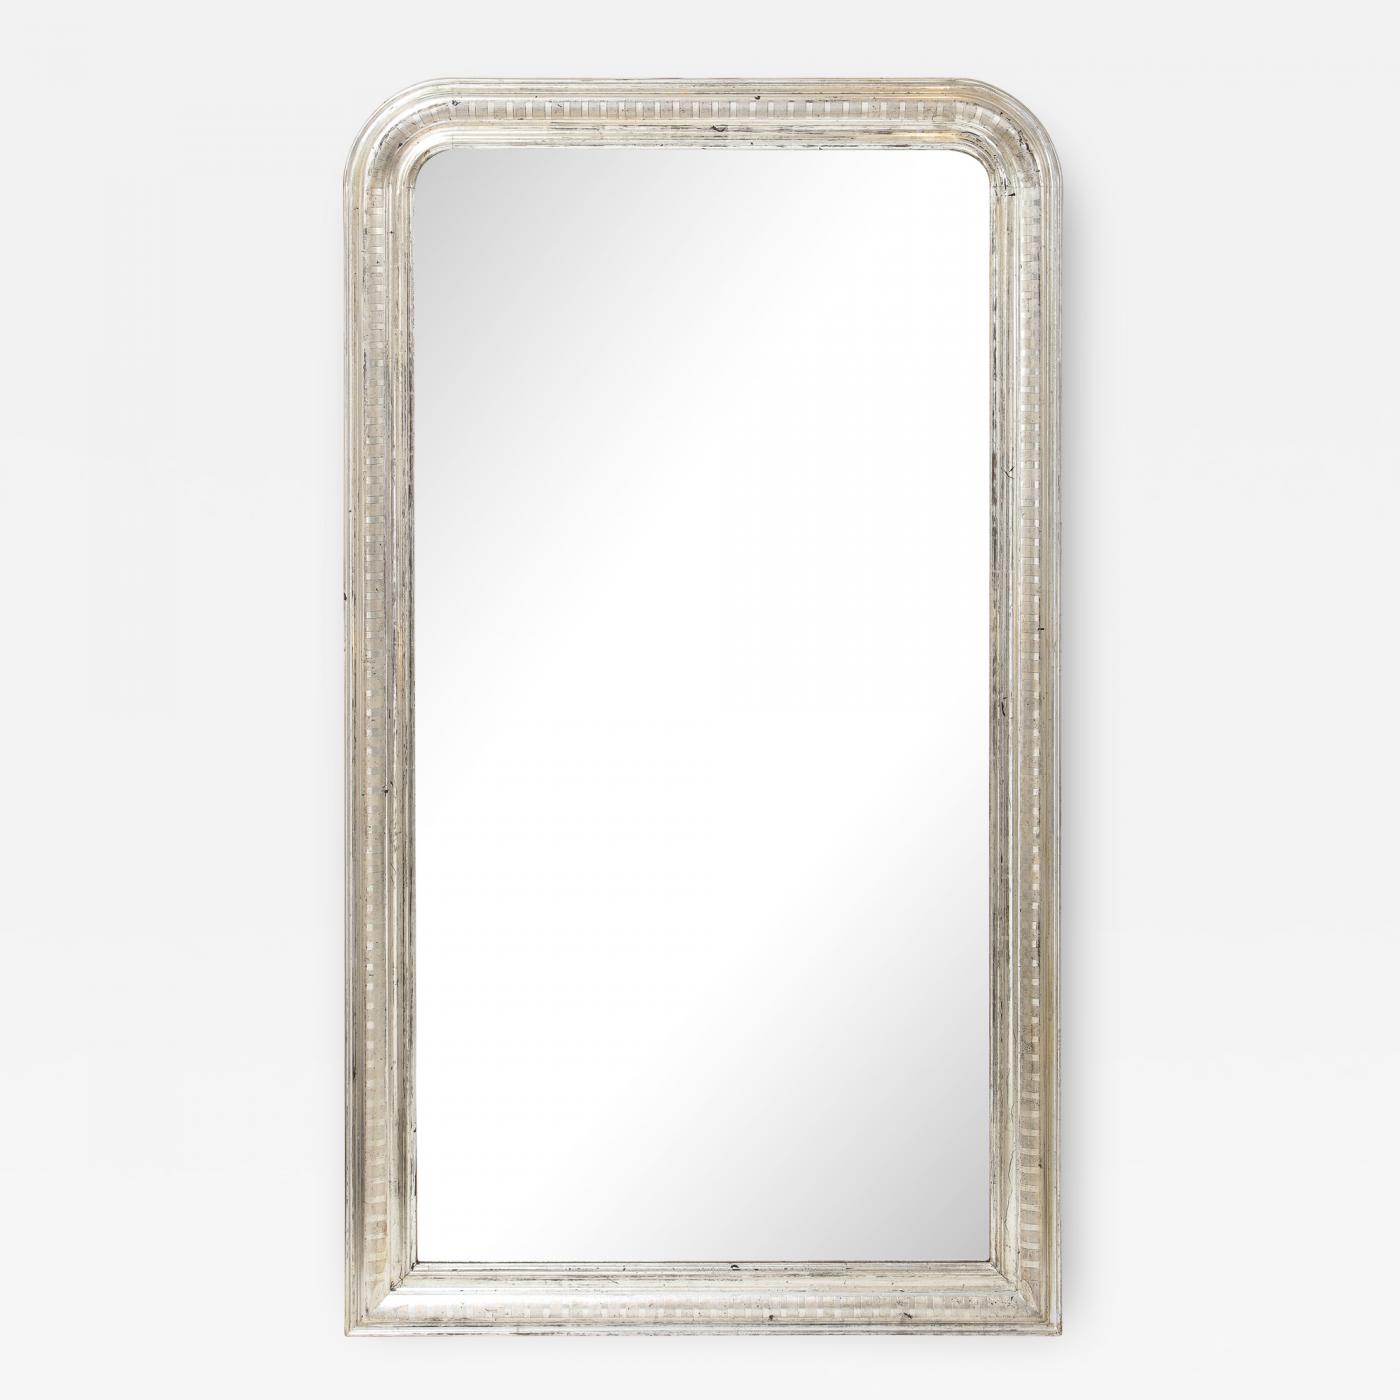 CLEARANCE! ACME Louis Philippe Mirror in Black 23734